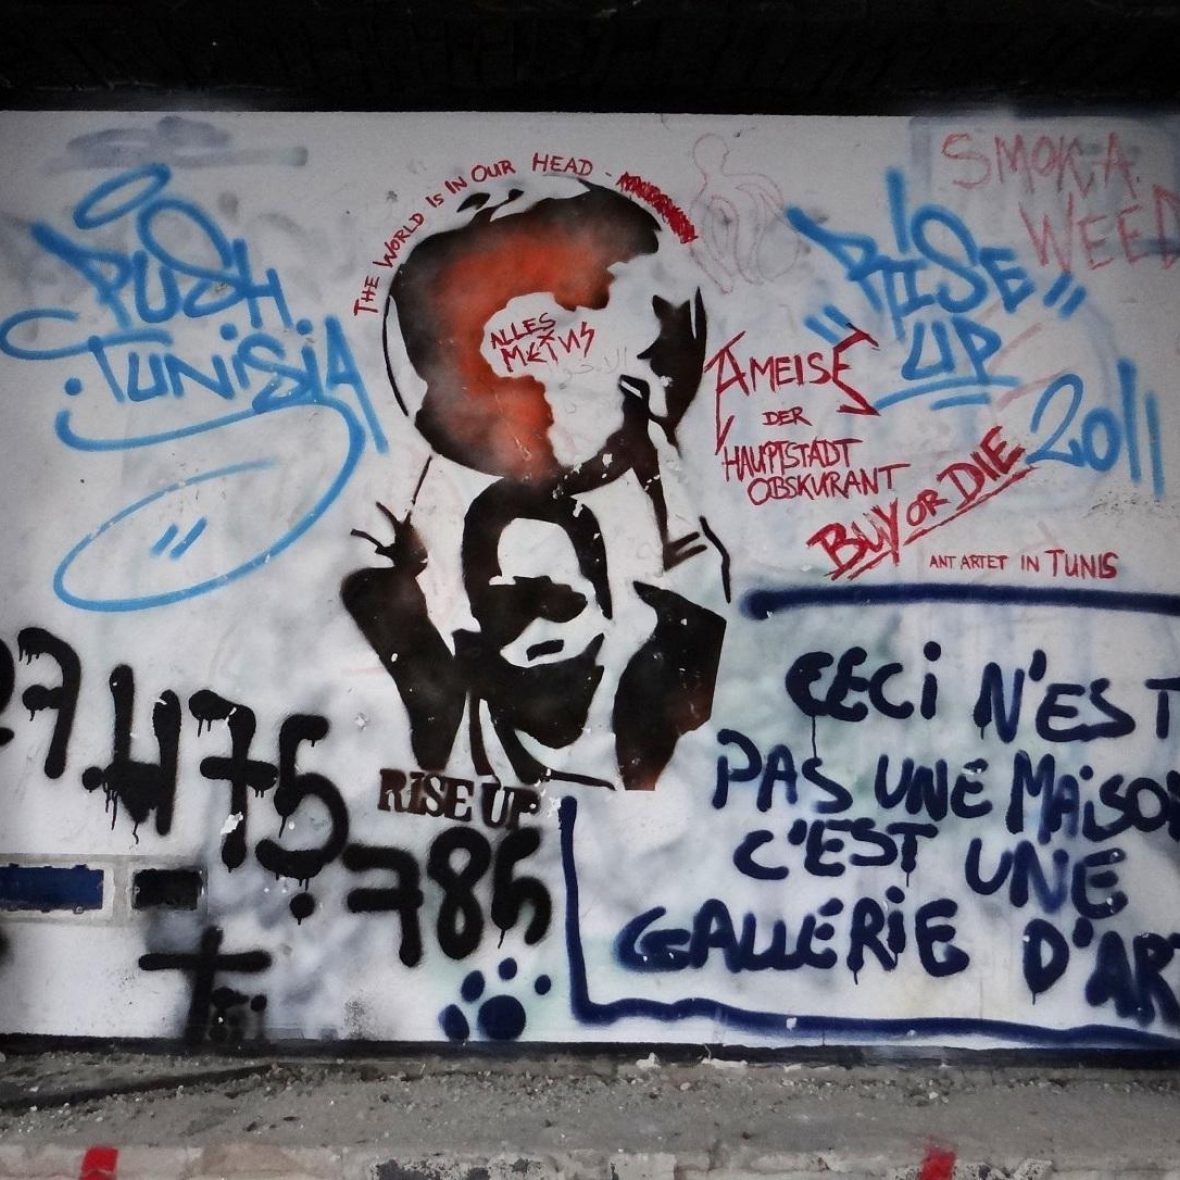 graffiti on a wall in Ghana of text written in French, shadow of a young Black child holding up the globe, and other words/numbers